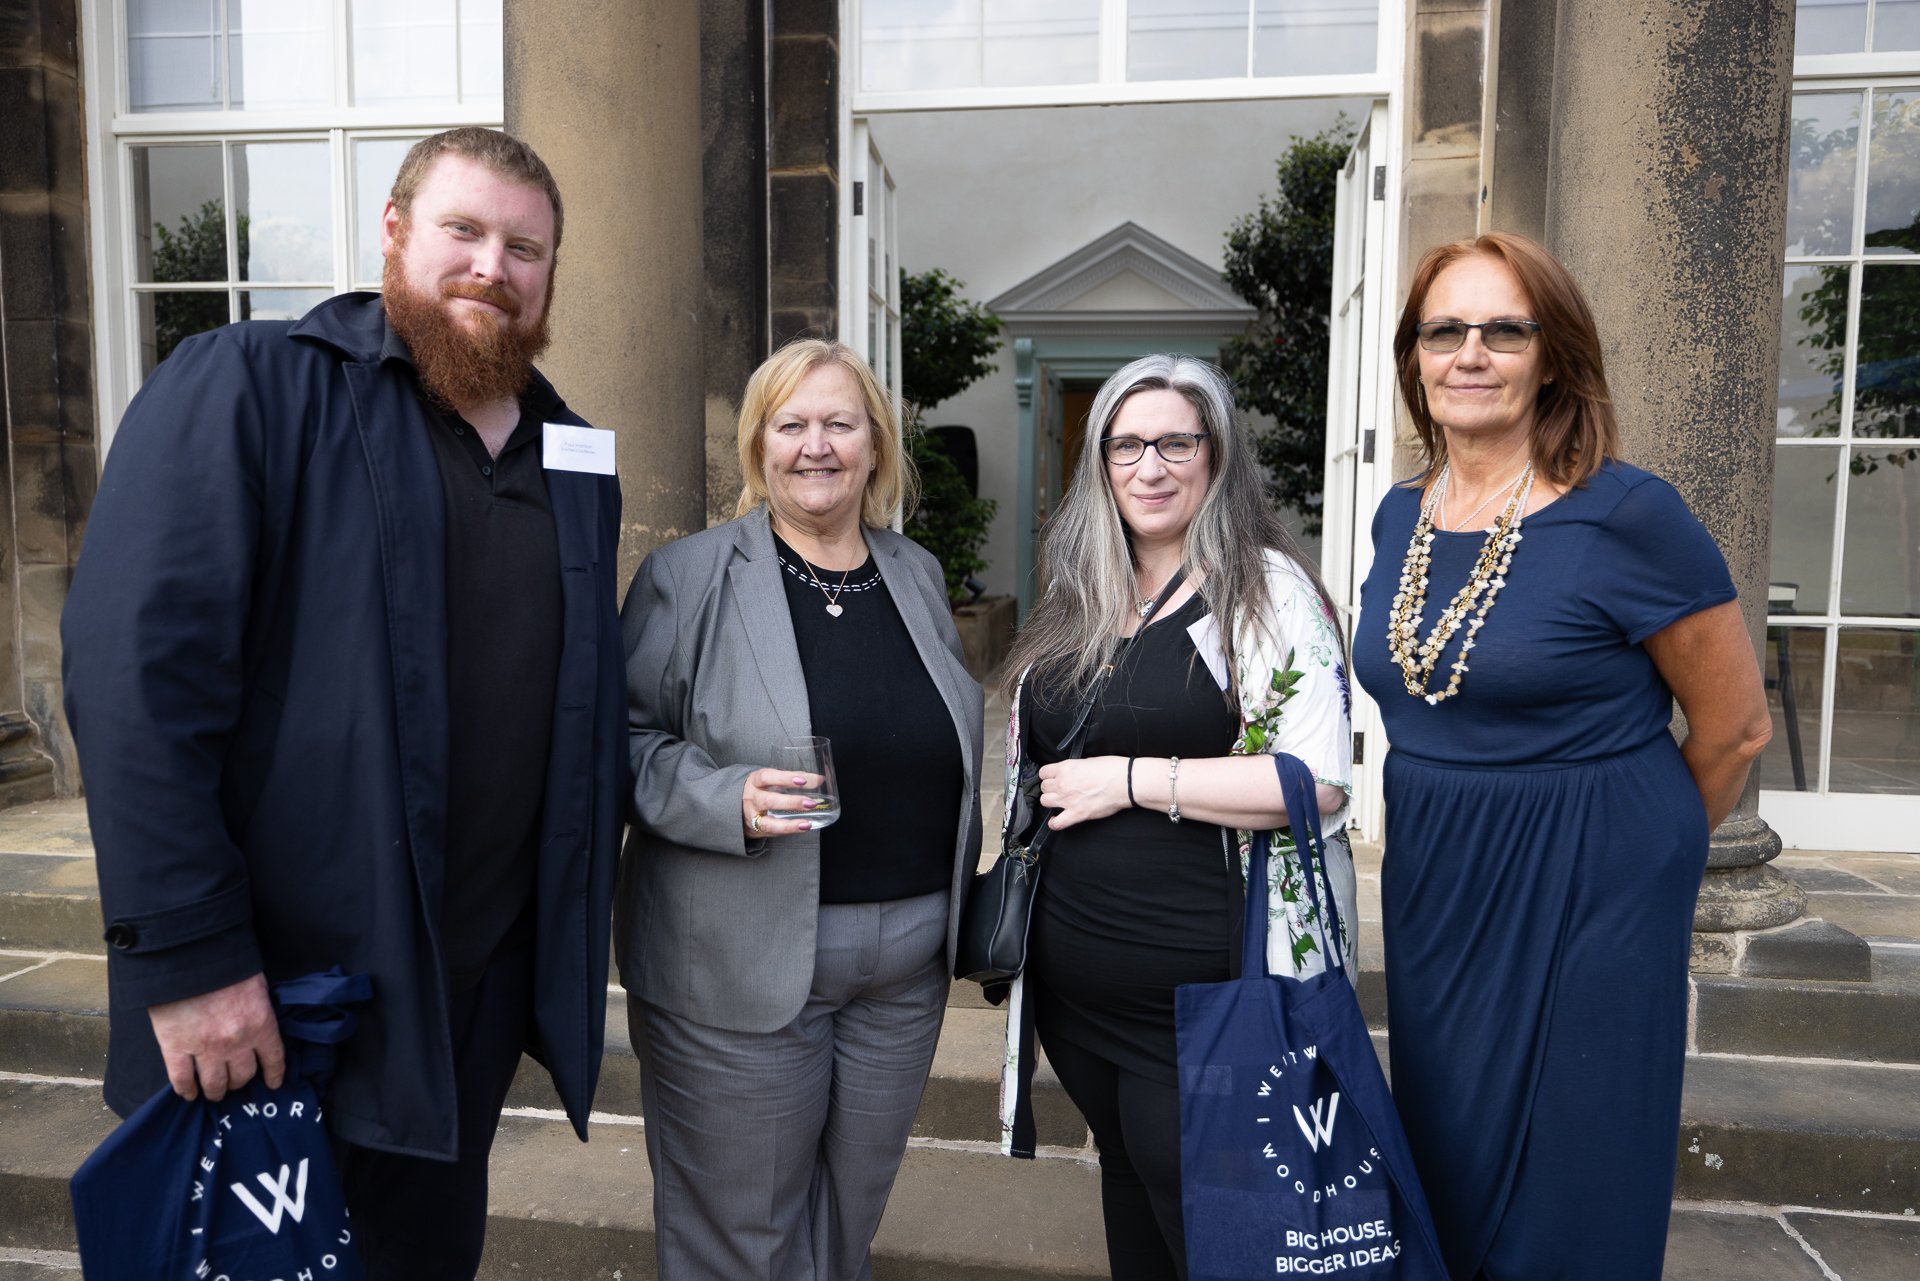 Wentworth Woodhouse calls for business Heroes to help raise £100,000